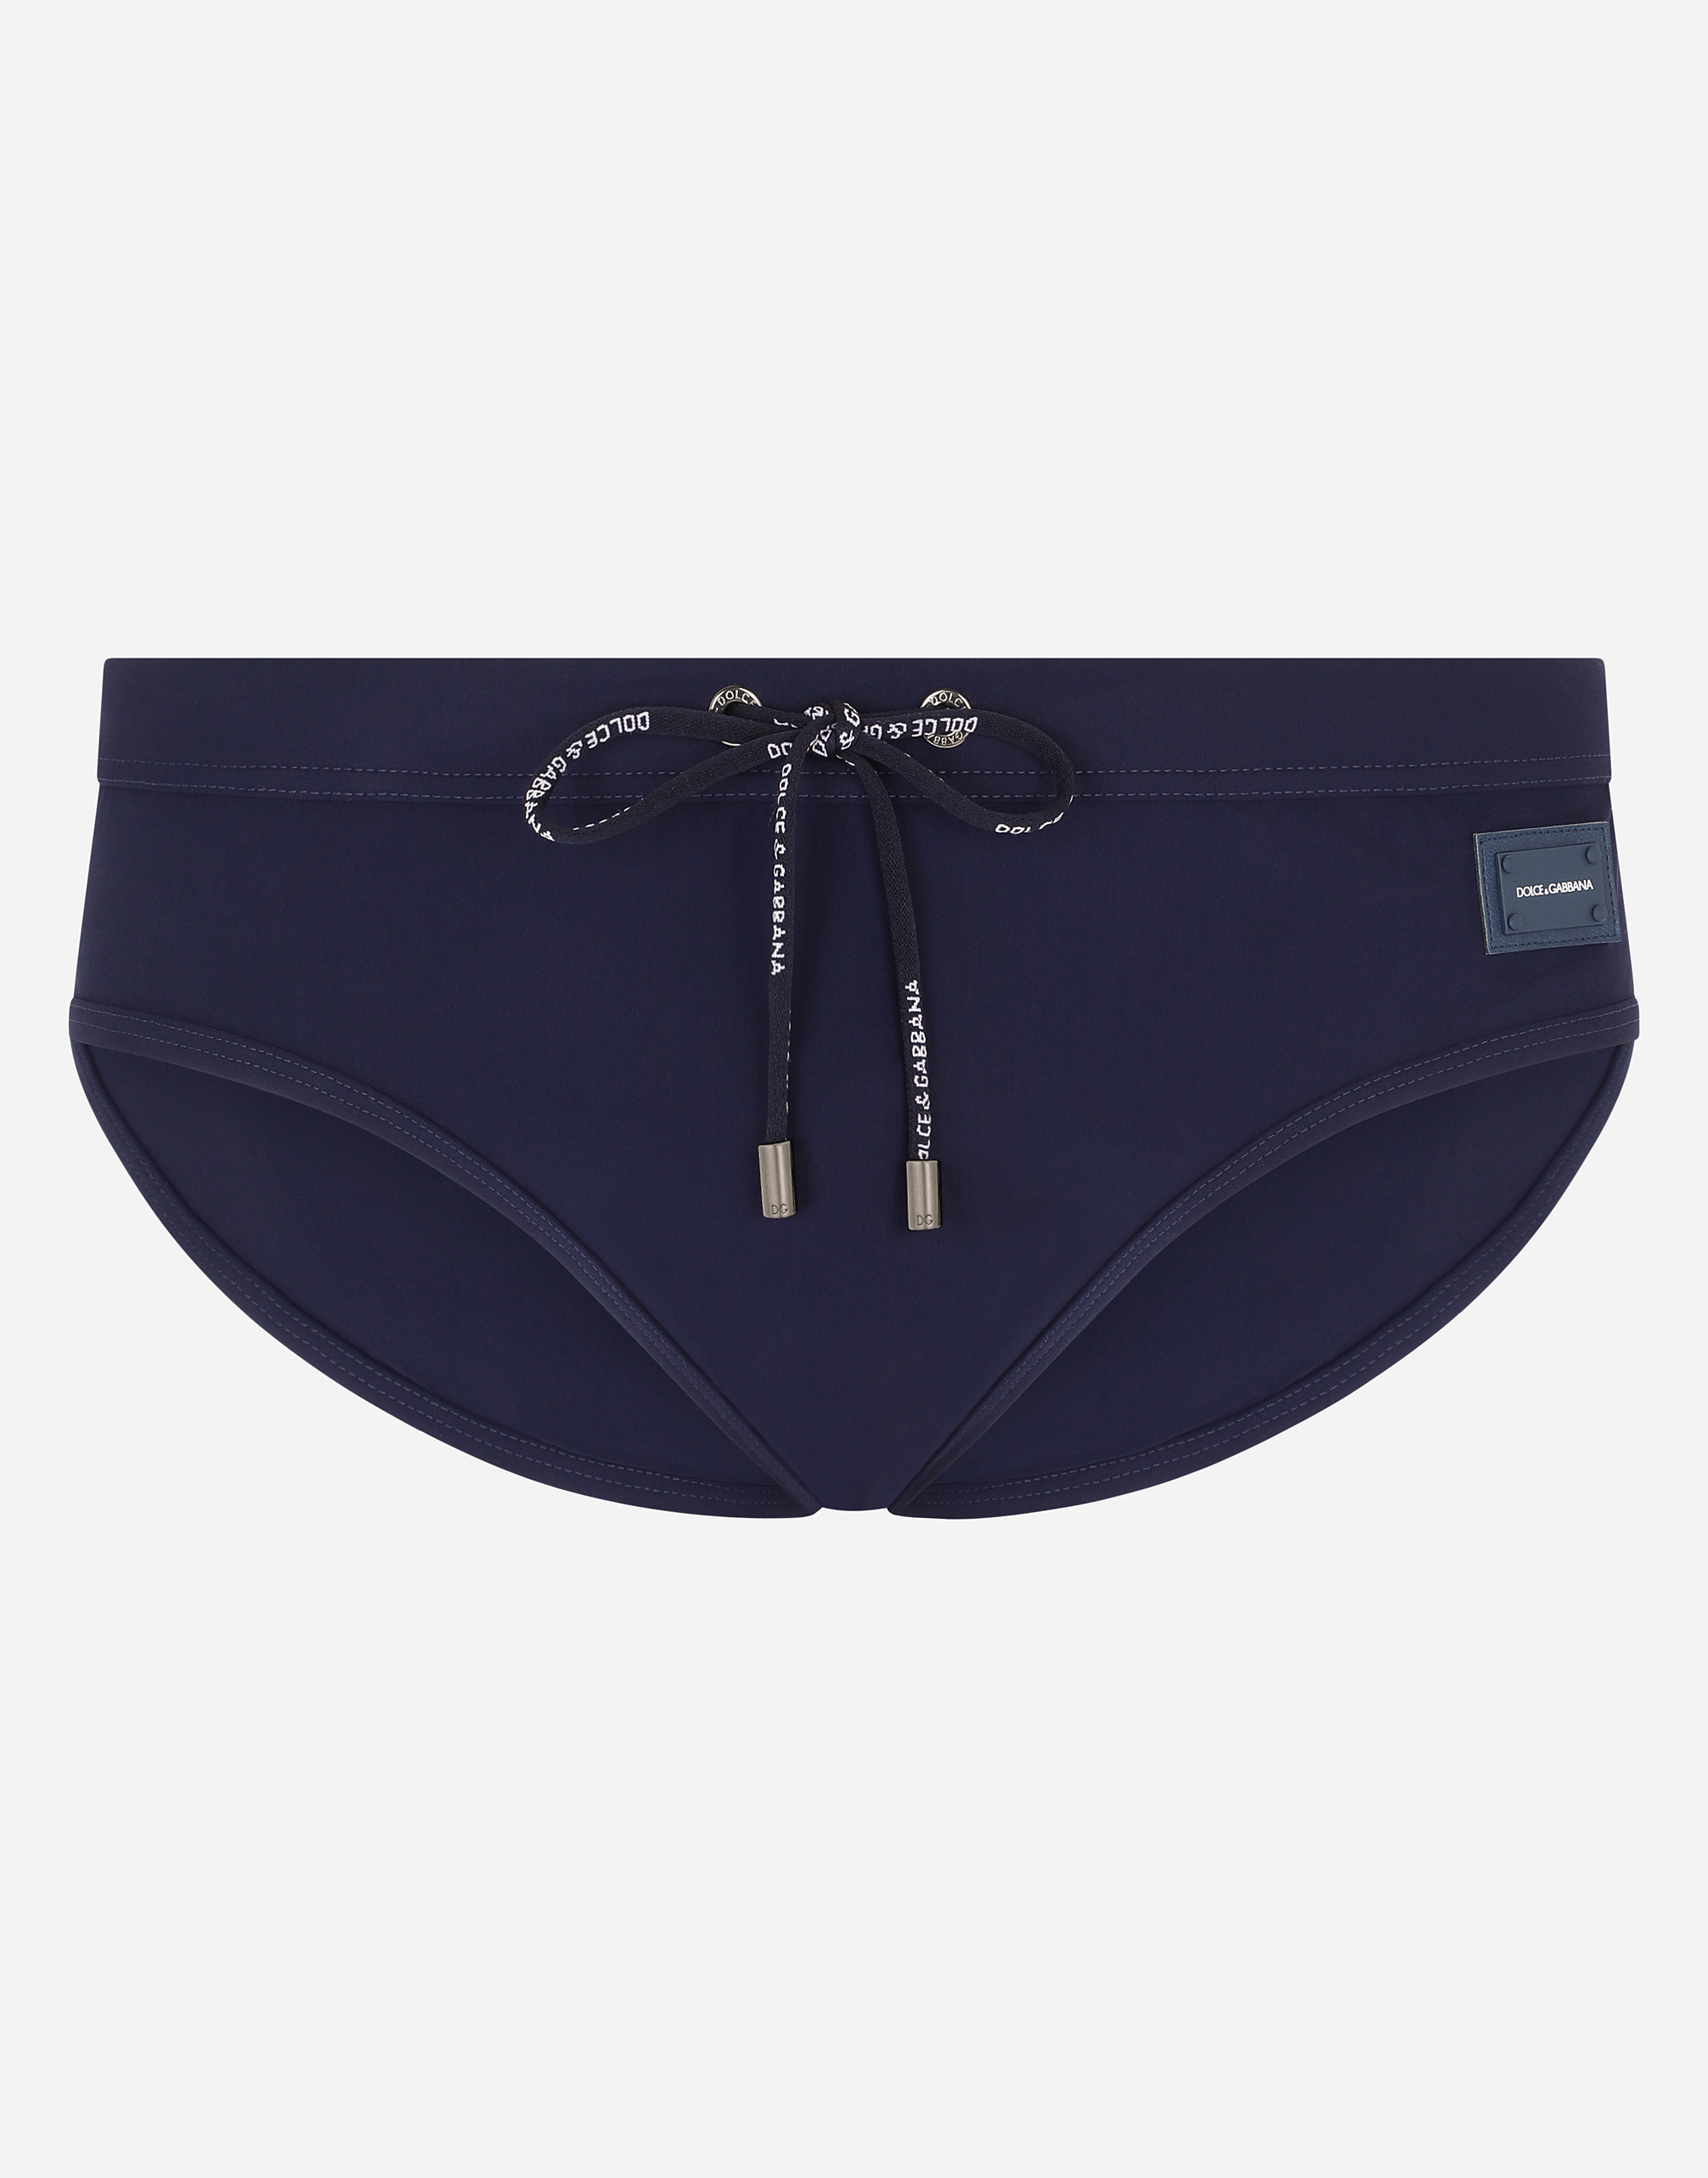 Swim briefs with high-cut leg and branded metal plate in Blue